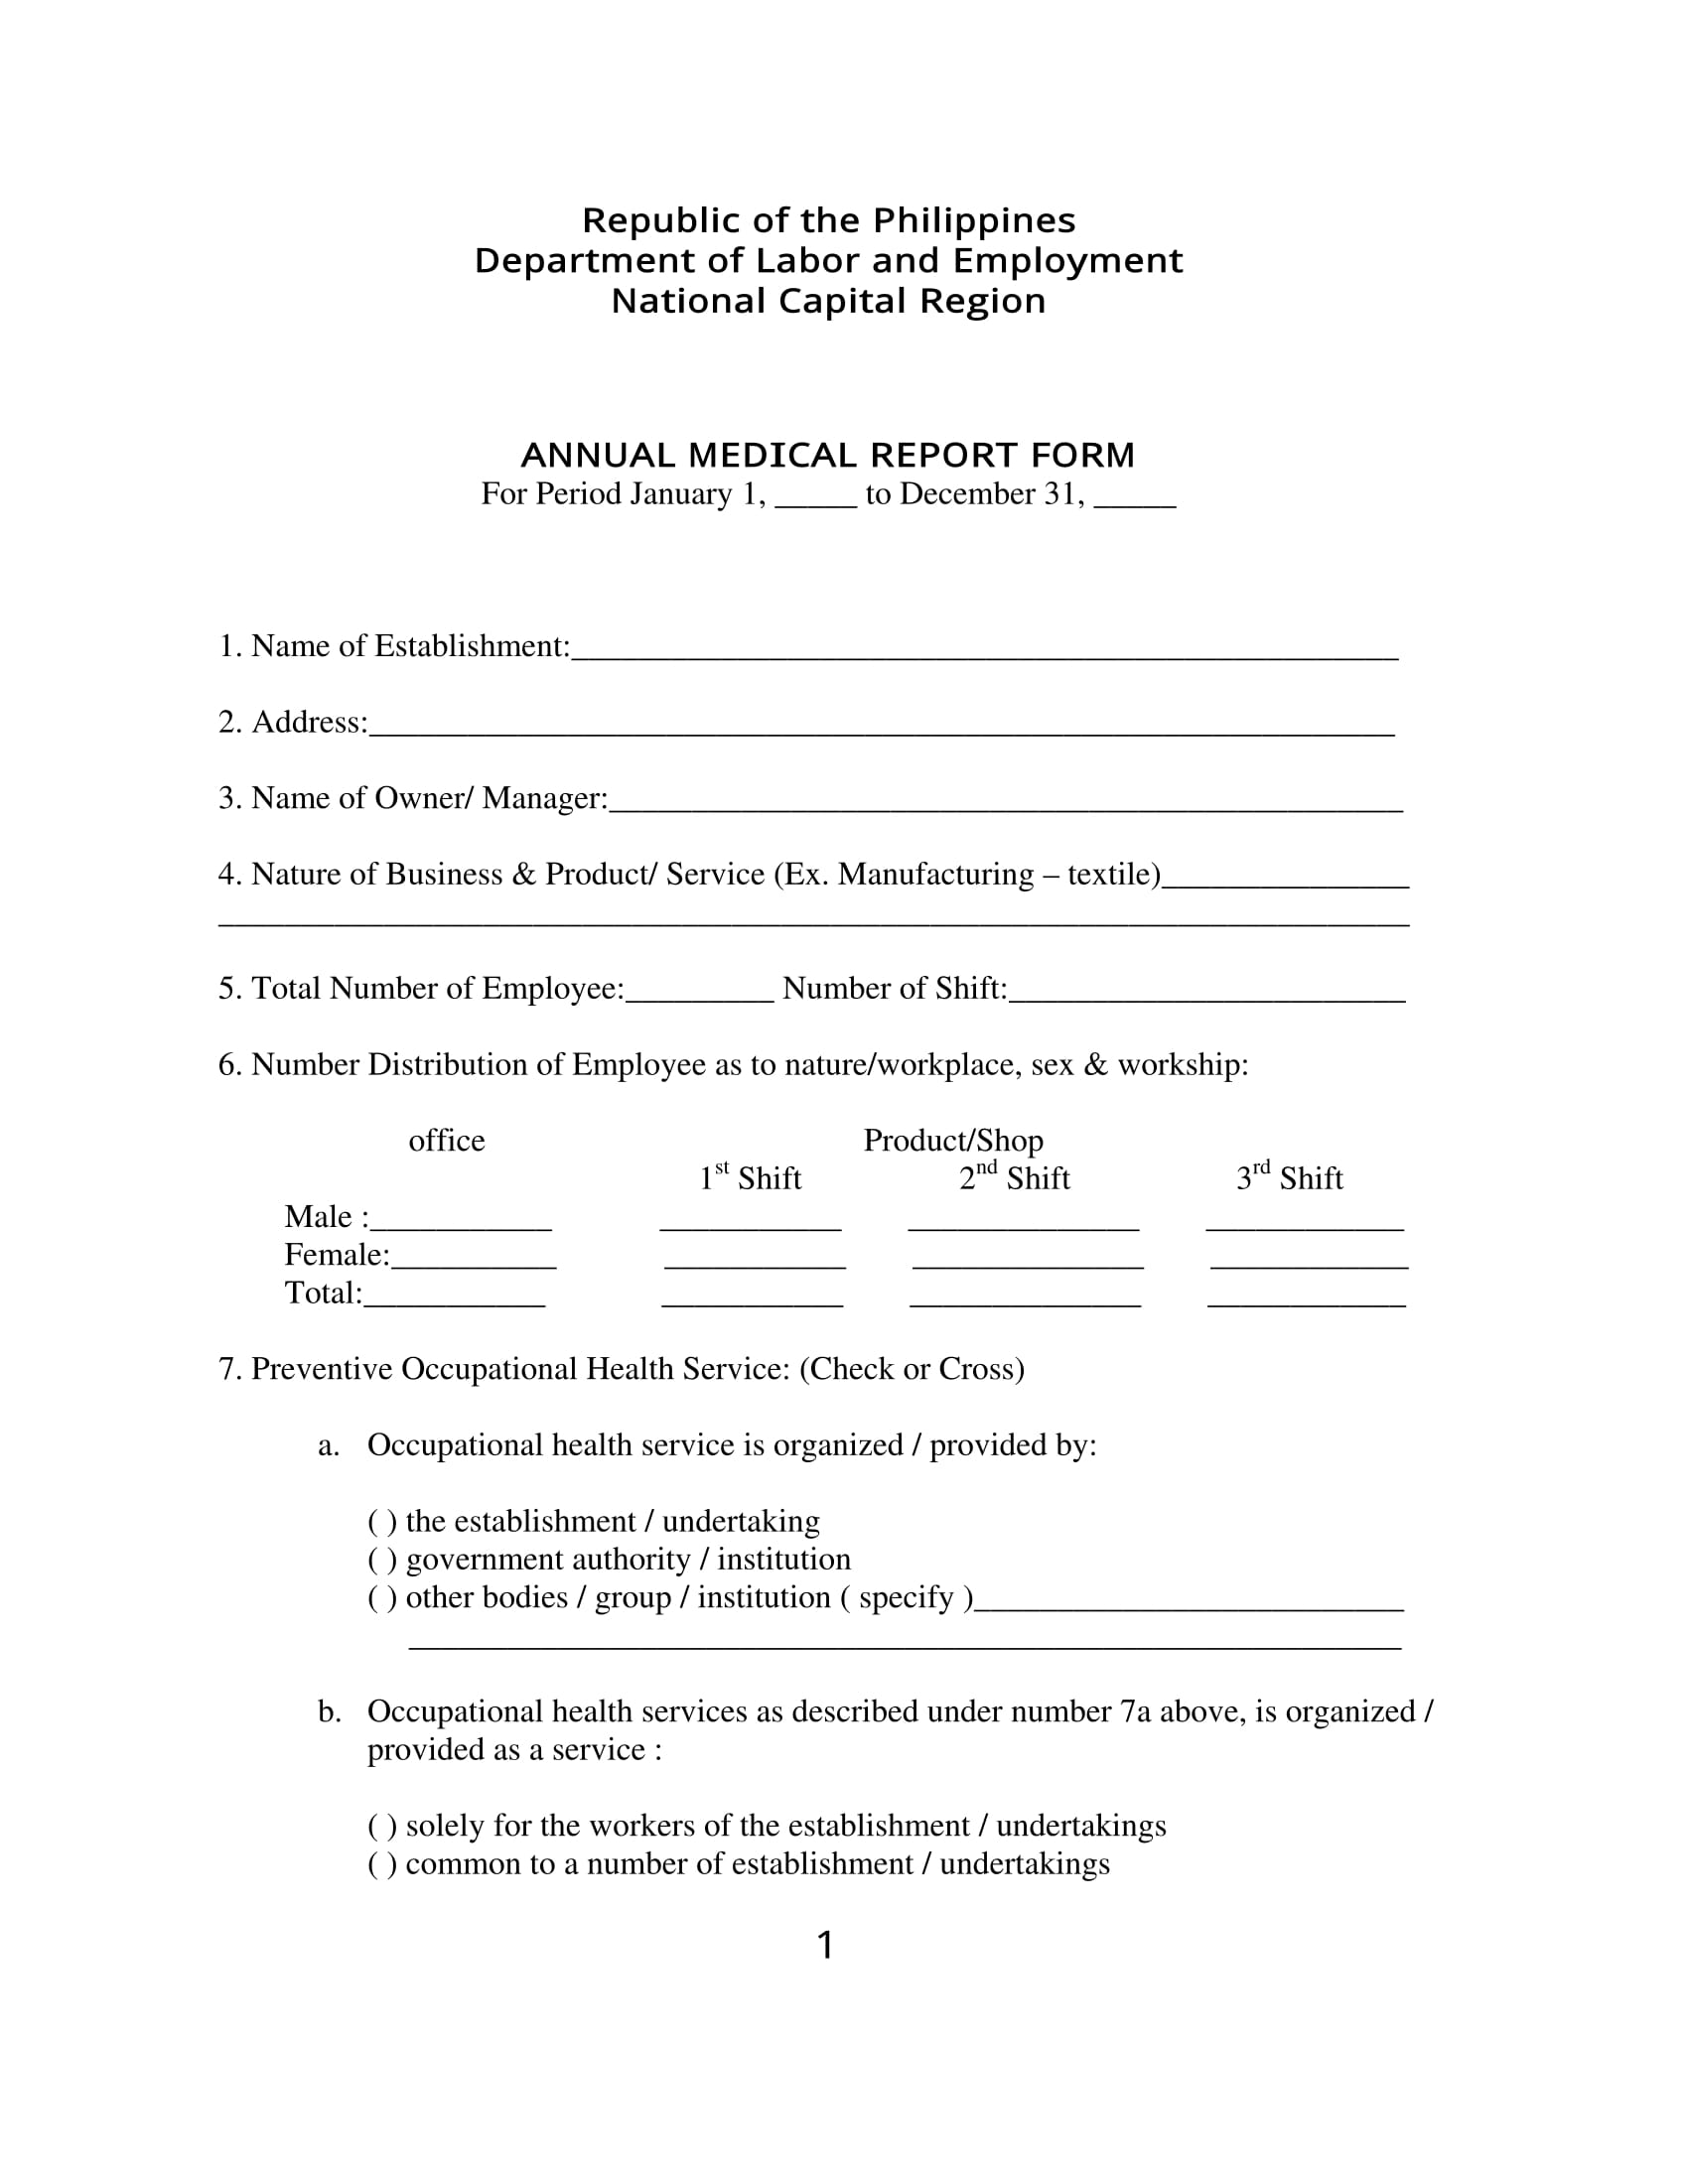 annual medical report form 1